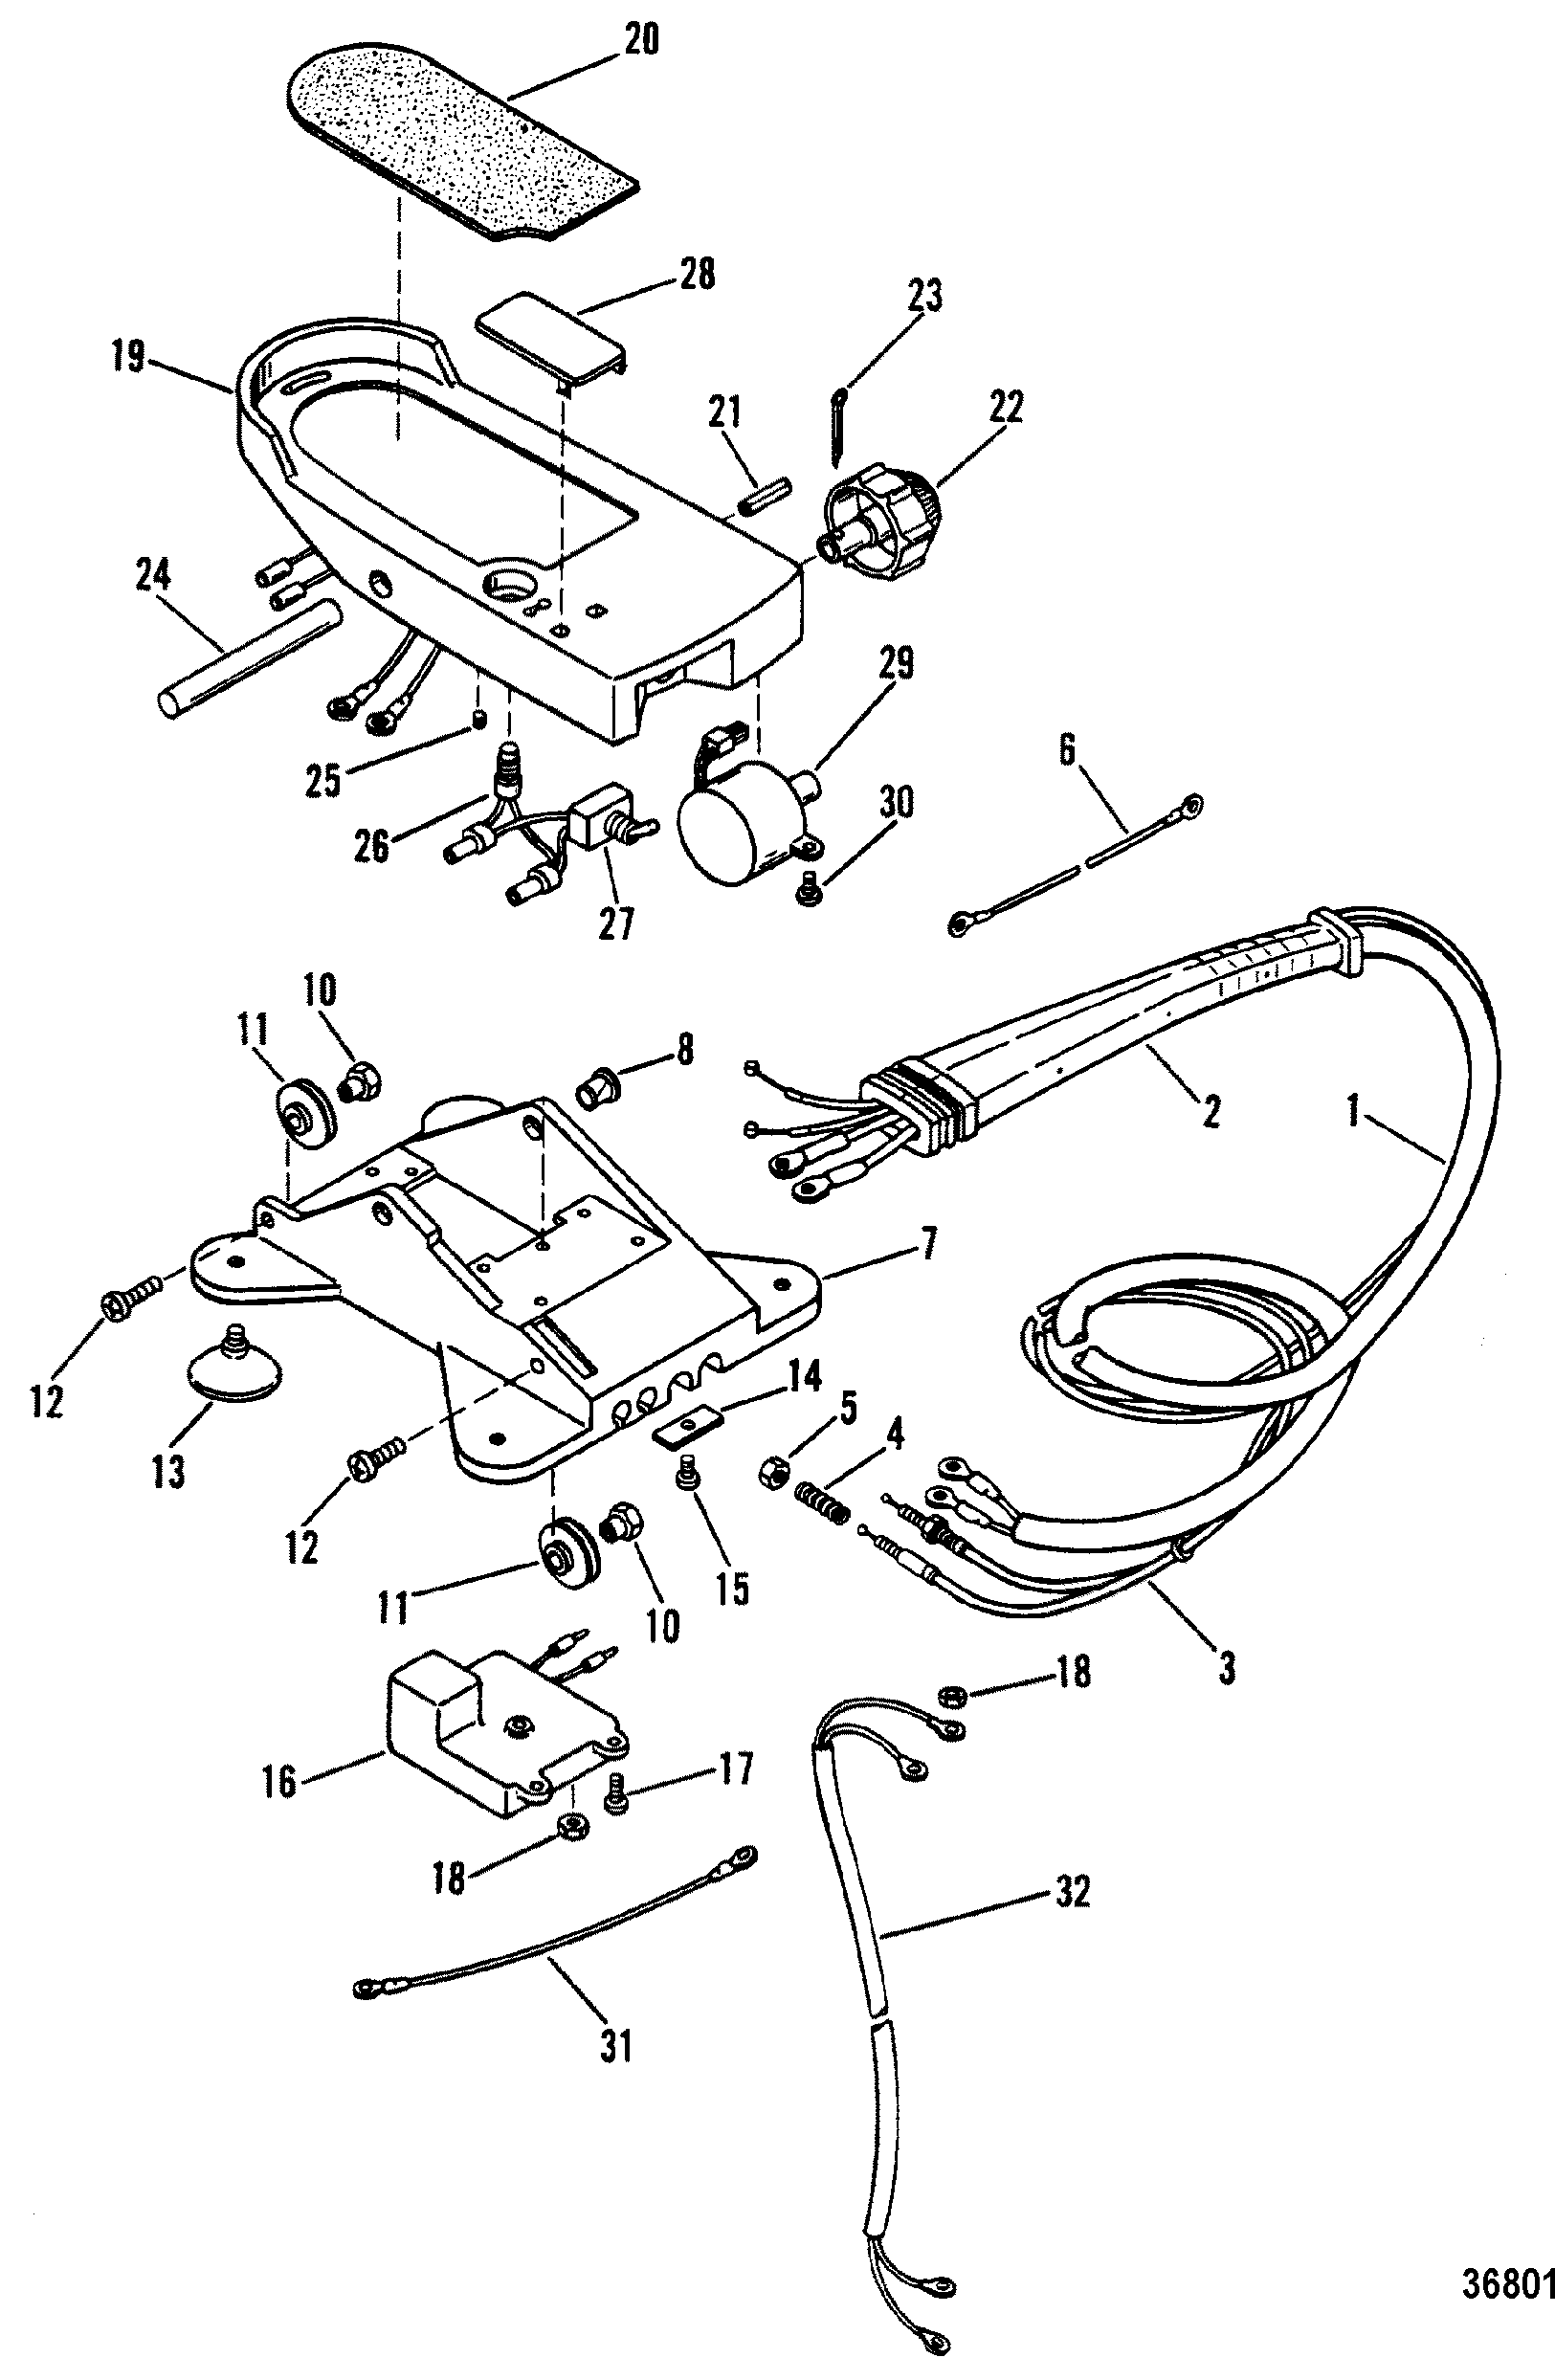 WIRING HARNESS AND FOOT PLATE(Remote)